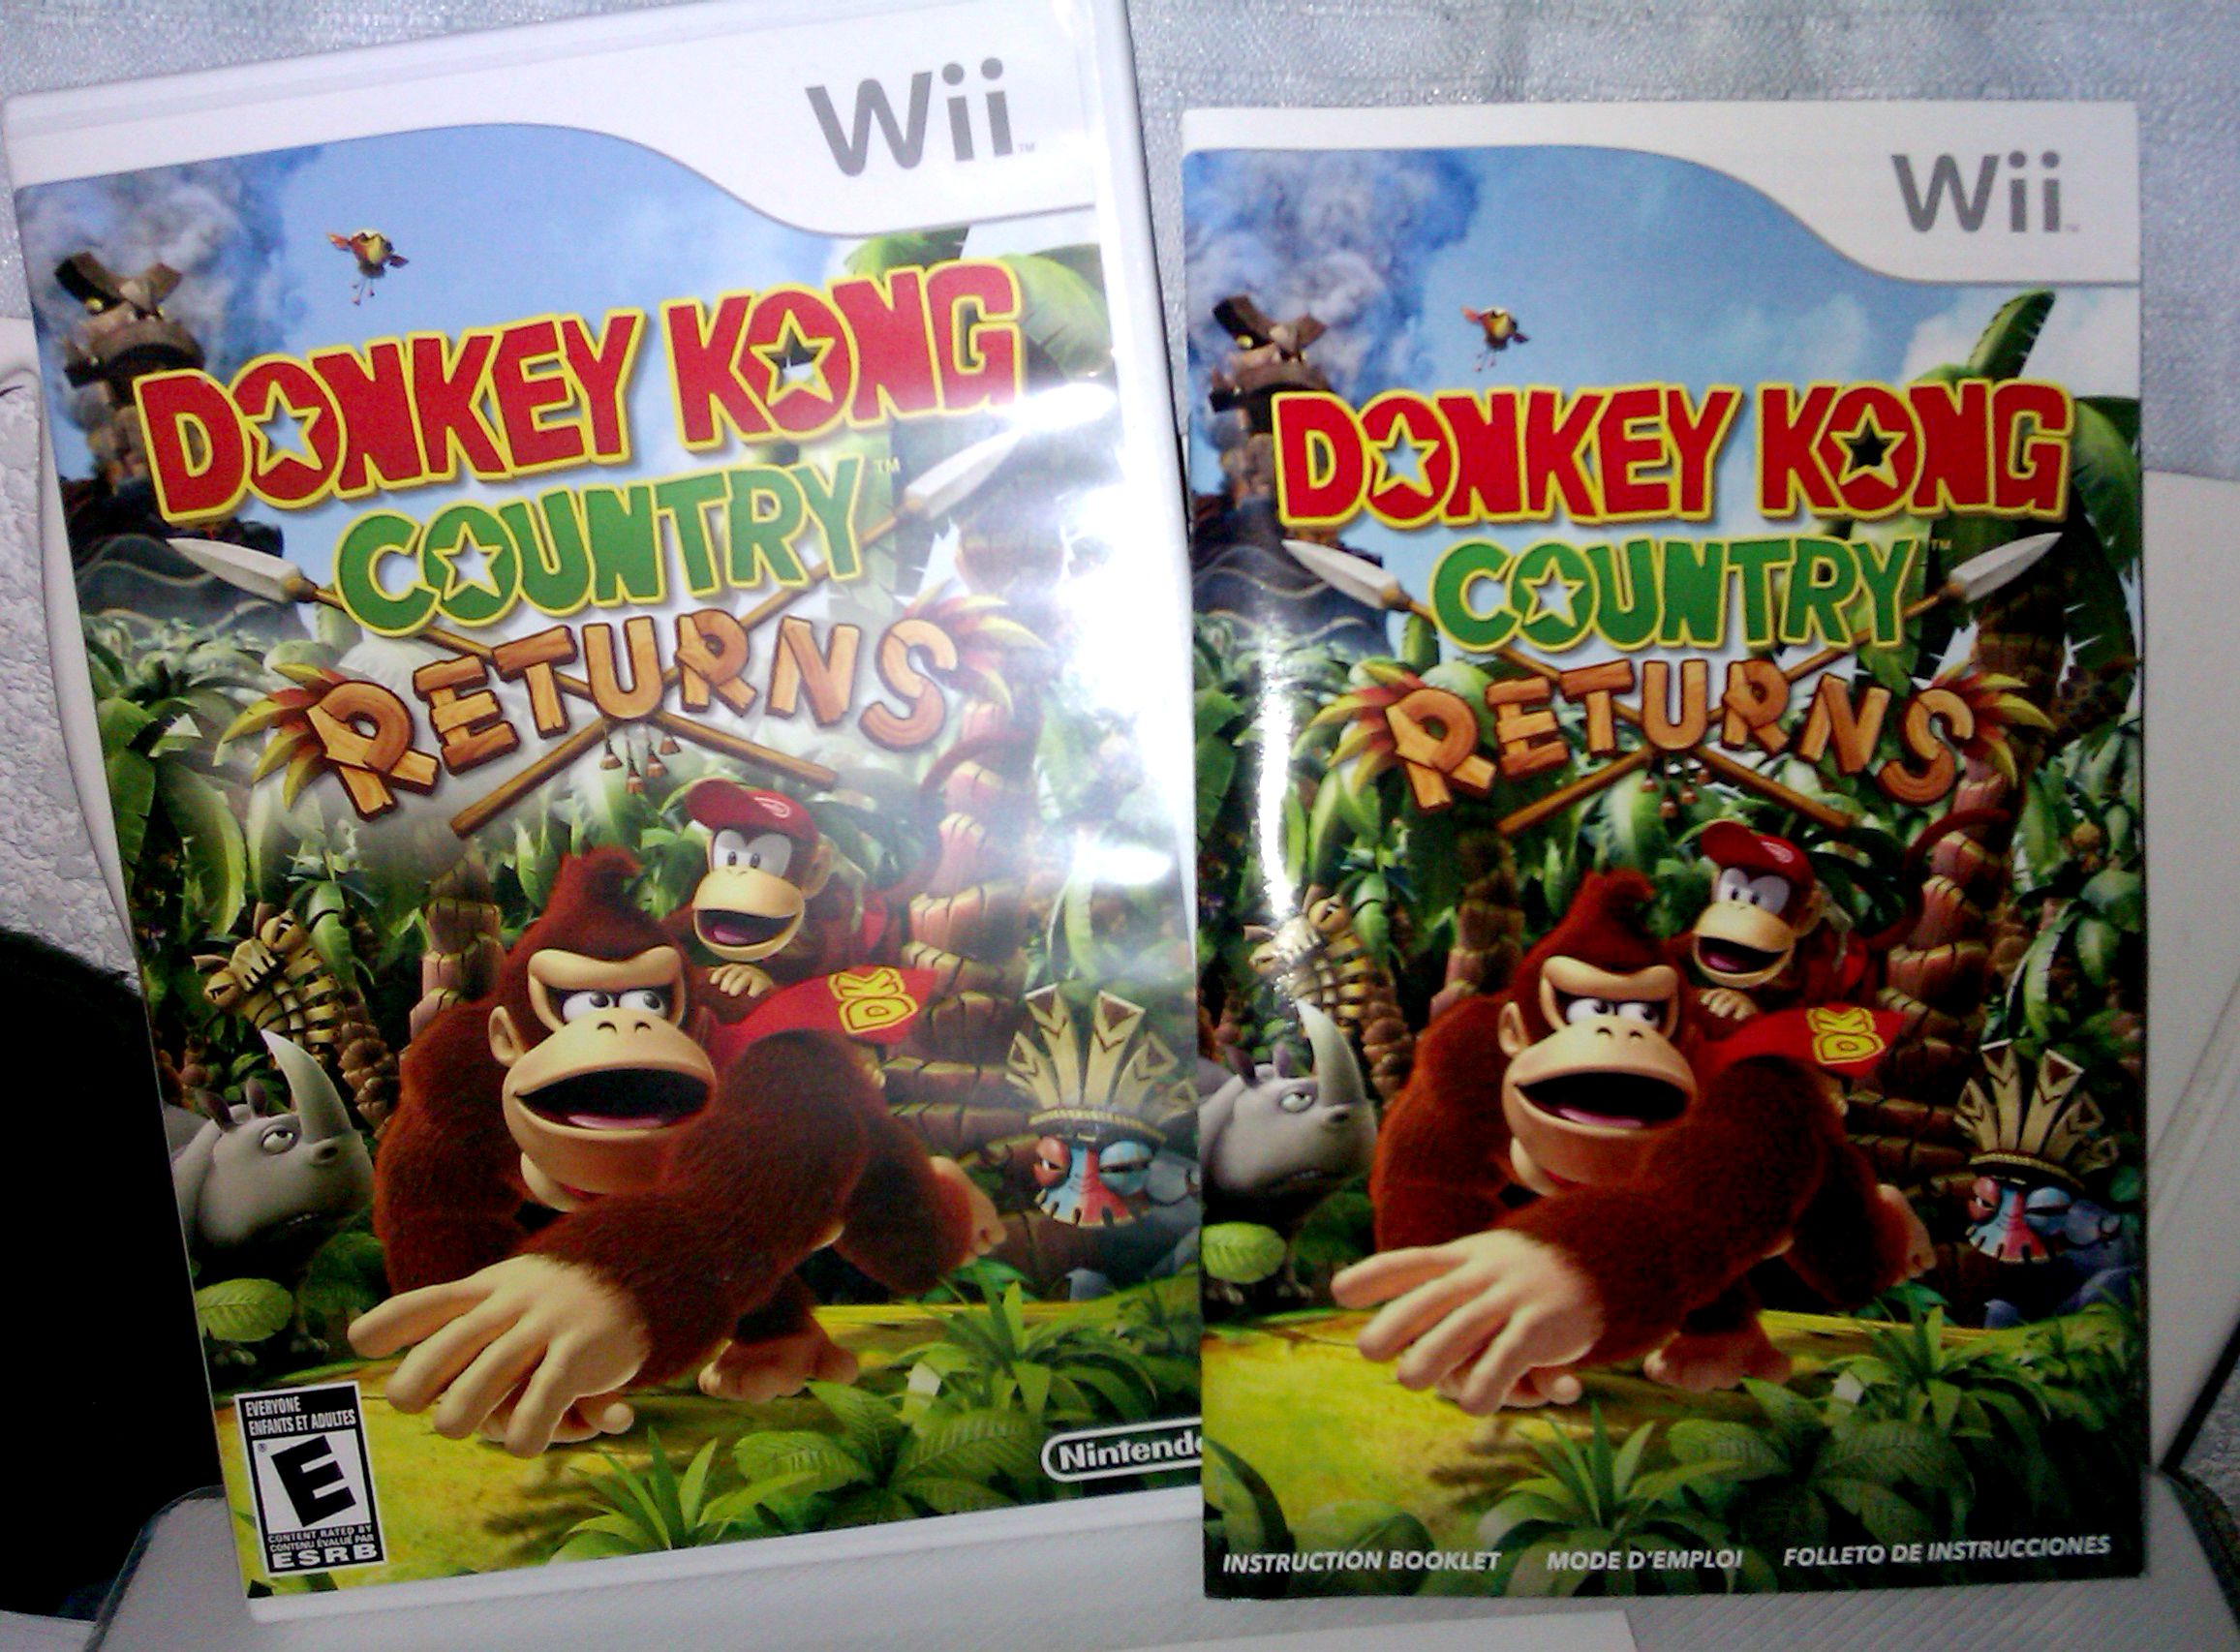 donkey kong country returns wii pal